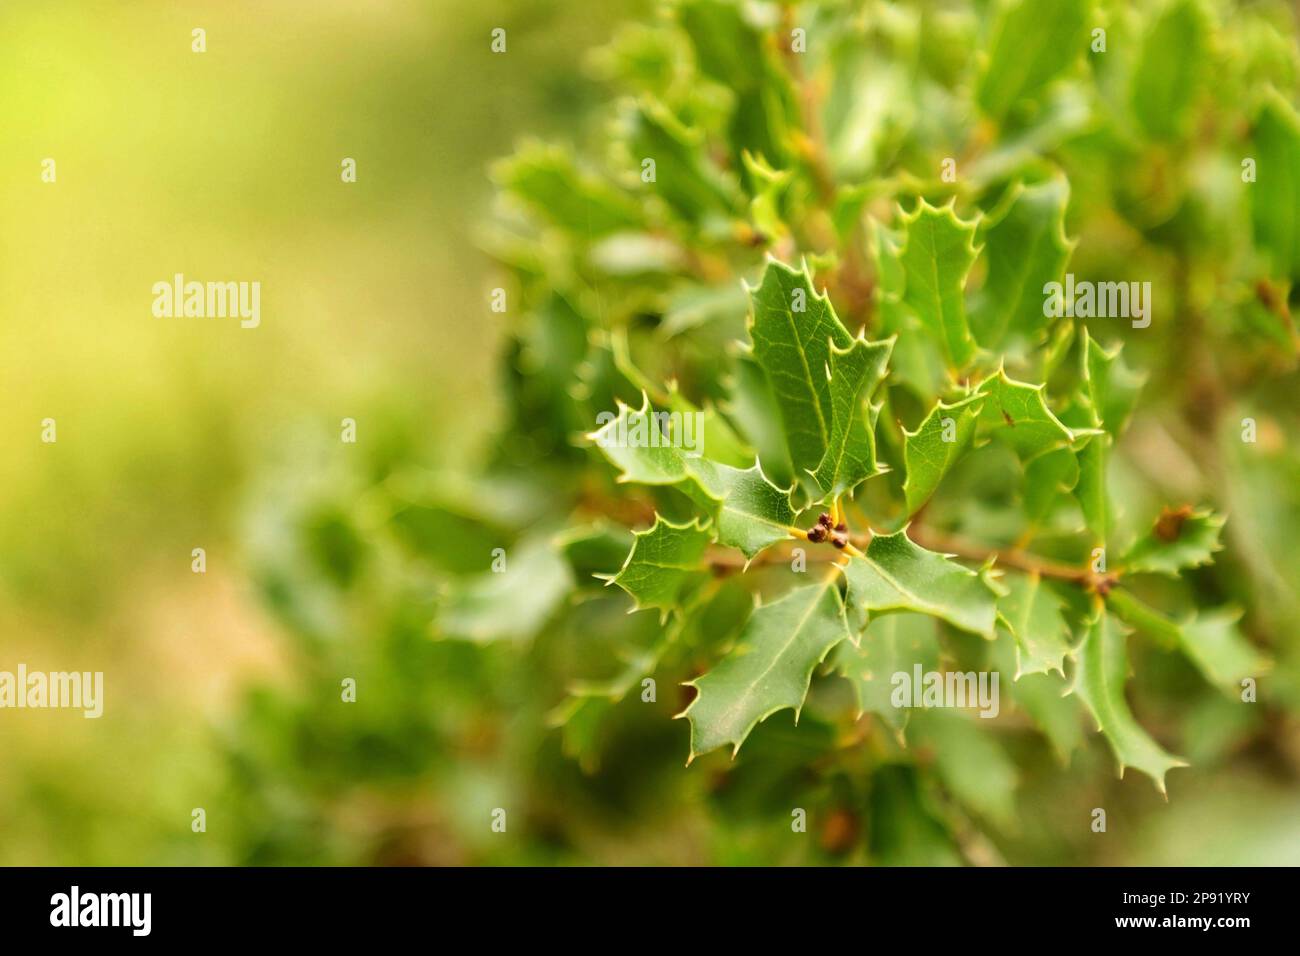 A closeup shot of a fruitless and light green mistletoe plant in winter. Stock Photo